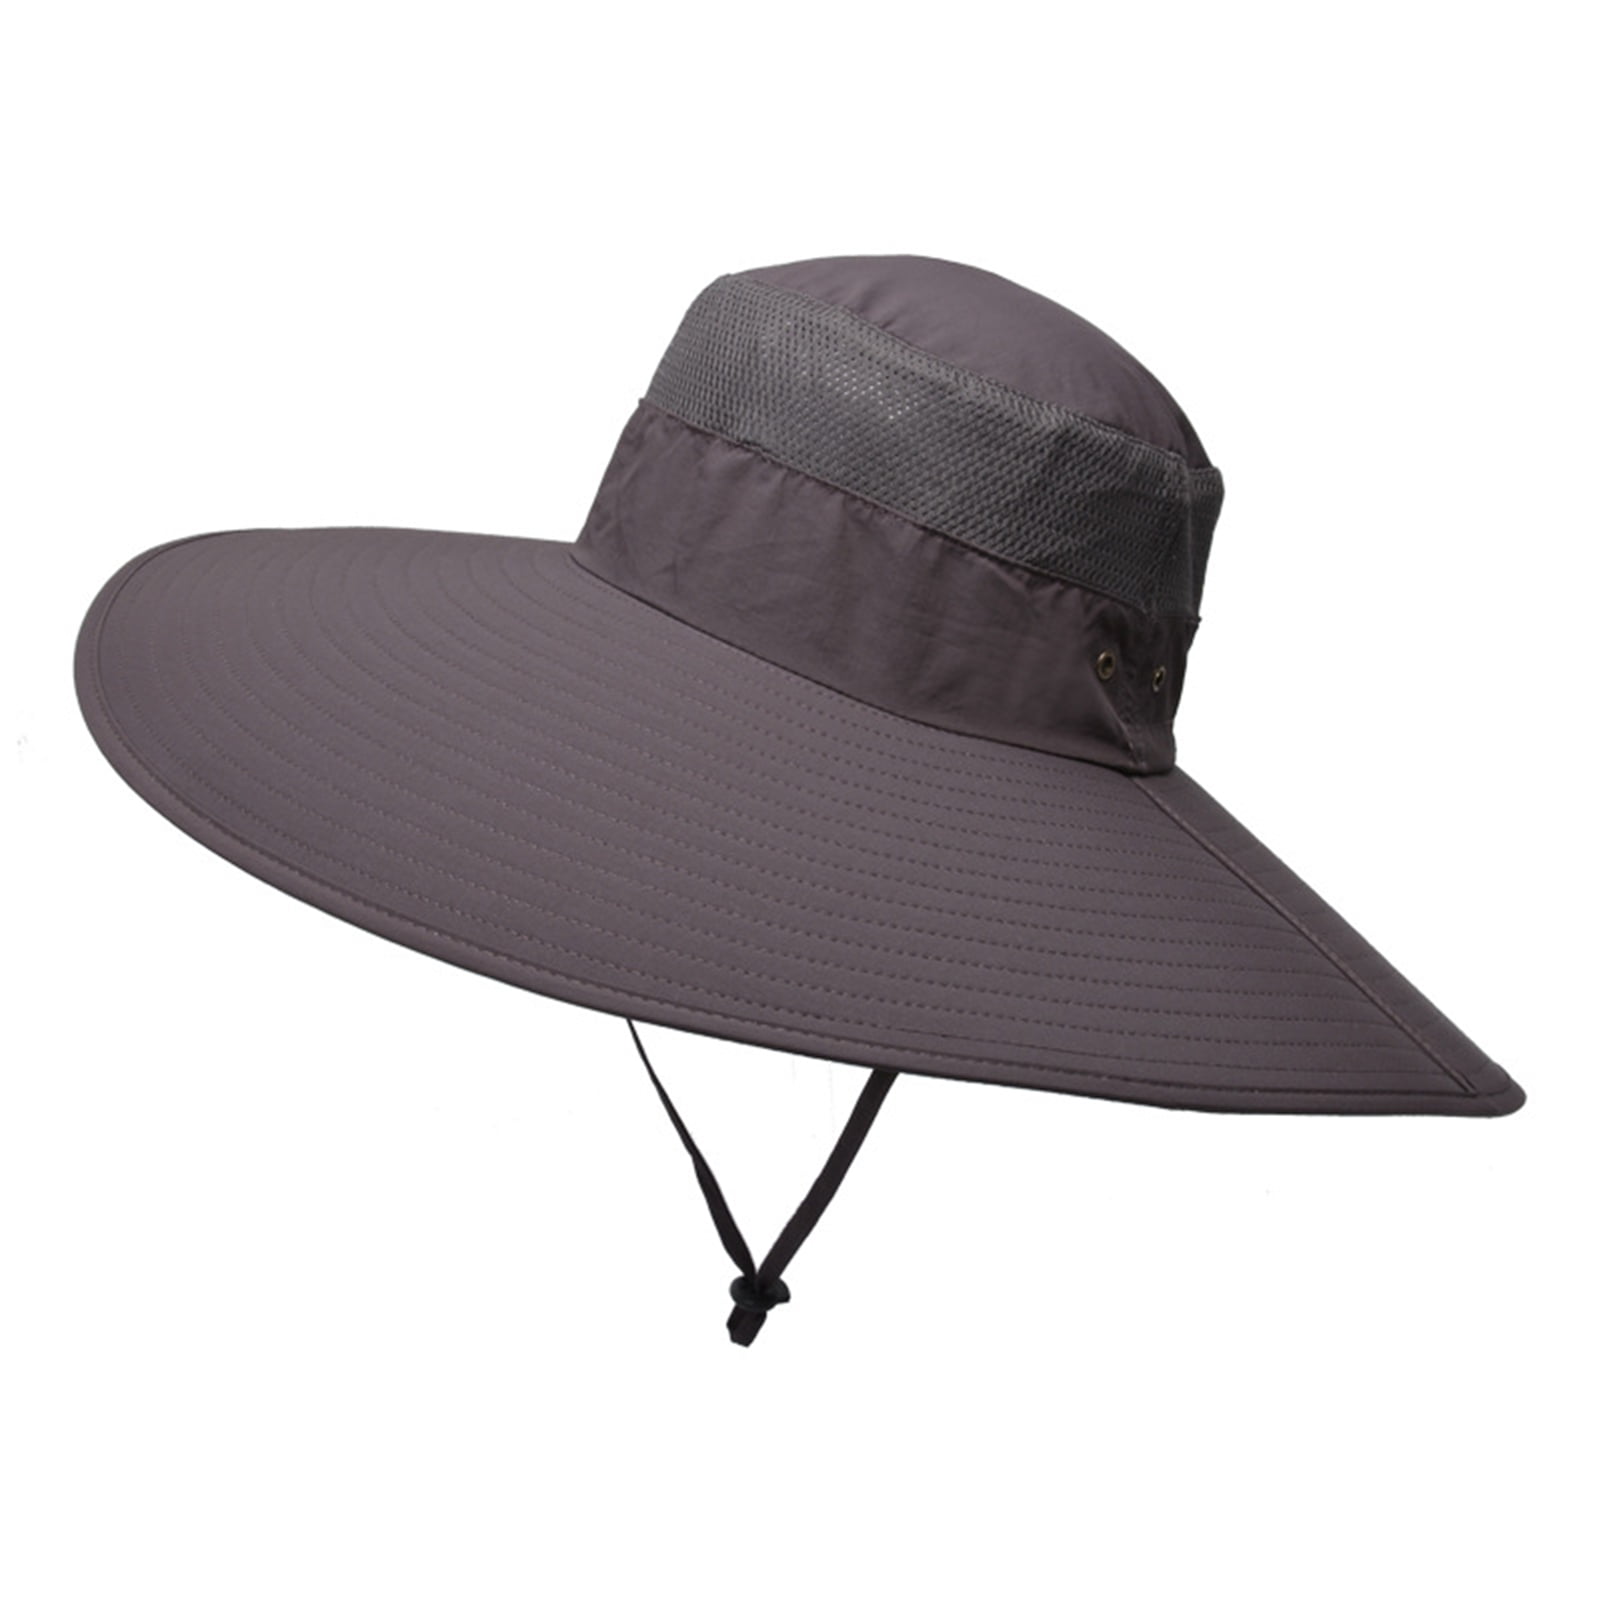 Mgfed Mens Super Wide Brim Sun Hat Upf50+ Uv Protection Waterproof Large Brim Bucket Hat For Fishing Hiking Camping Other